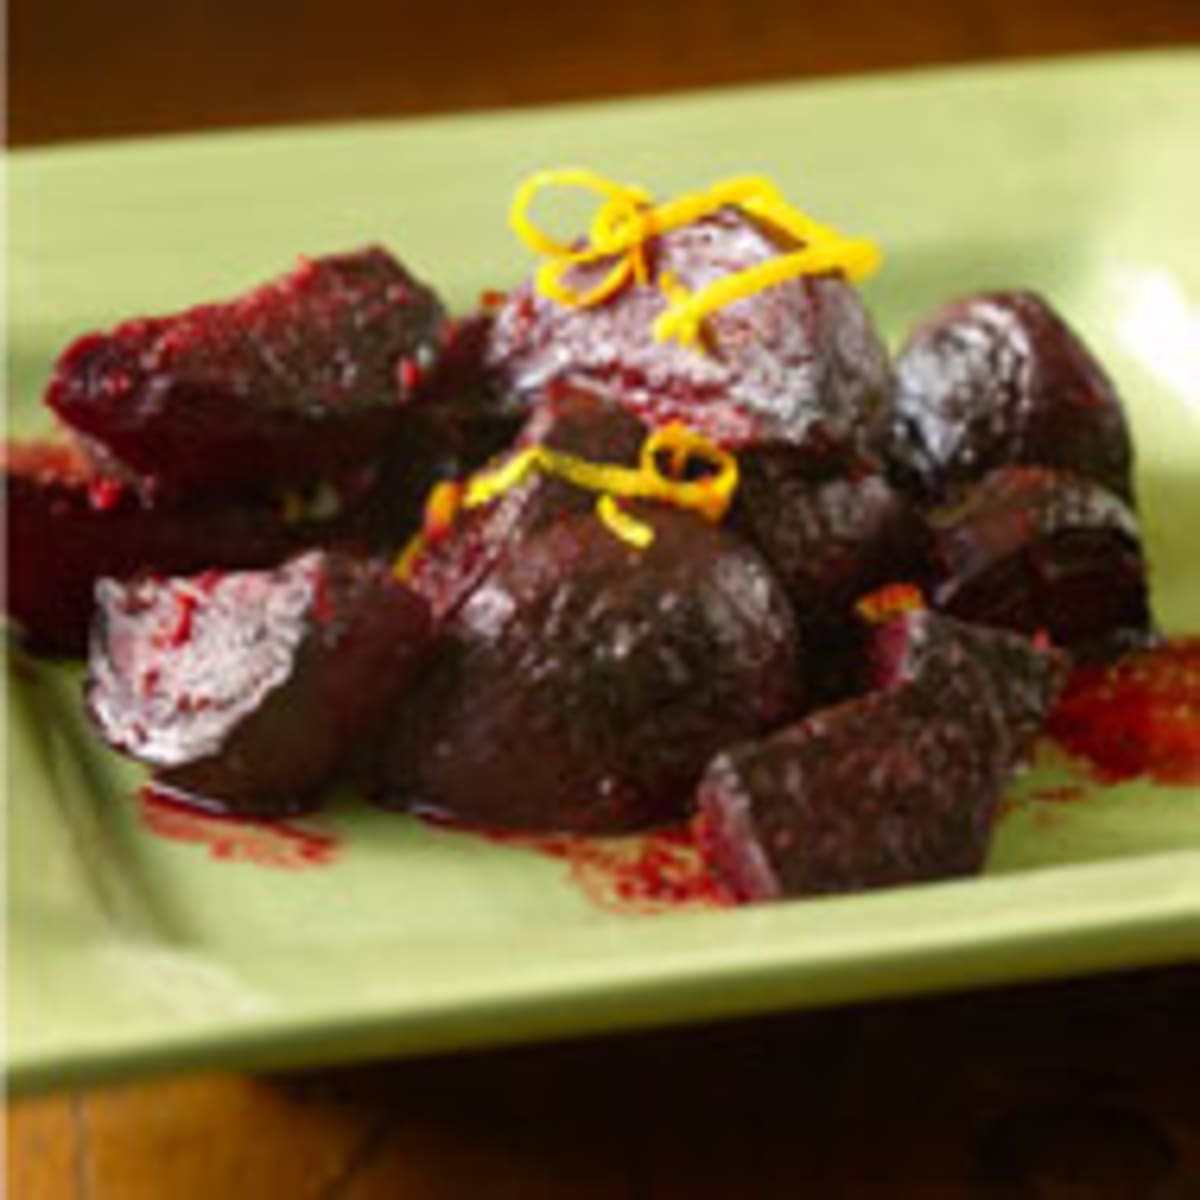 Roasted Beets With Orange Sauce image